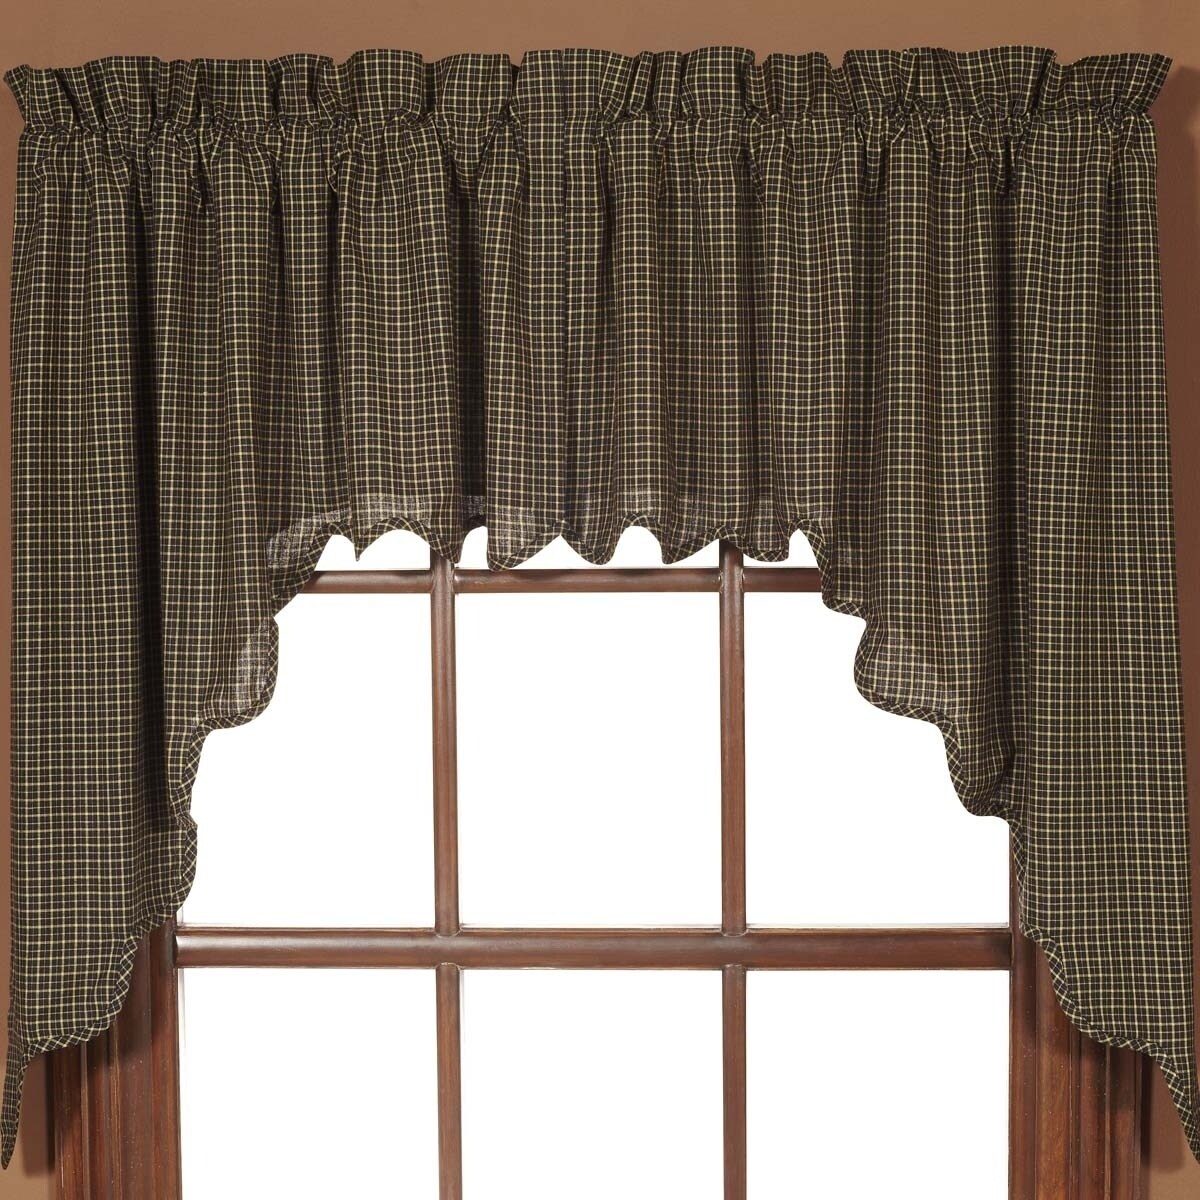 Black Primitive Kitchen Curtains Vhc Kettle Grove Plaid Swag Pair Rod Pocket Cotton Swag 36x36x16 Overstock 17926285